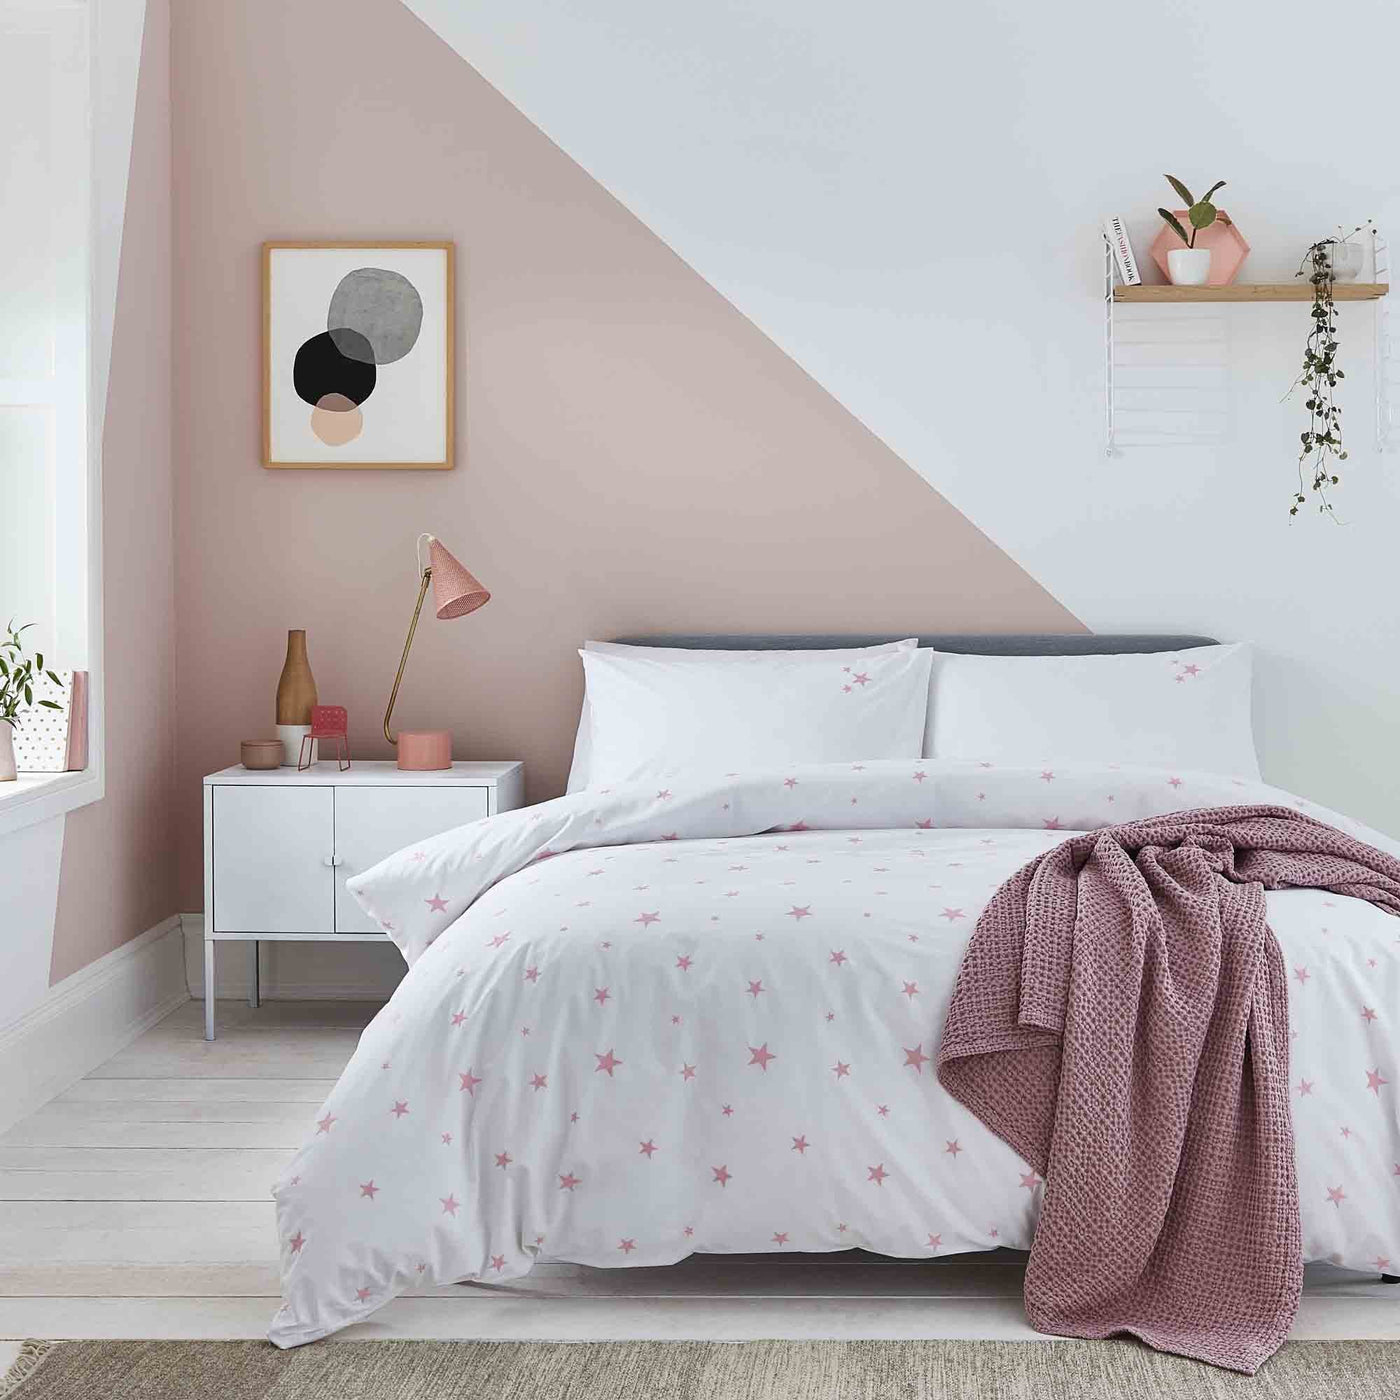 Scattered Stars White and Pink Organic Cotton Duvet Cover